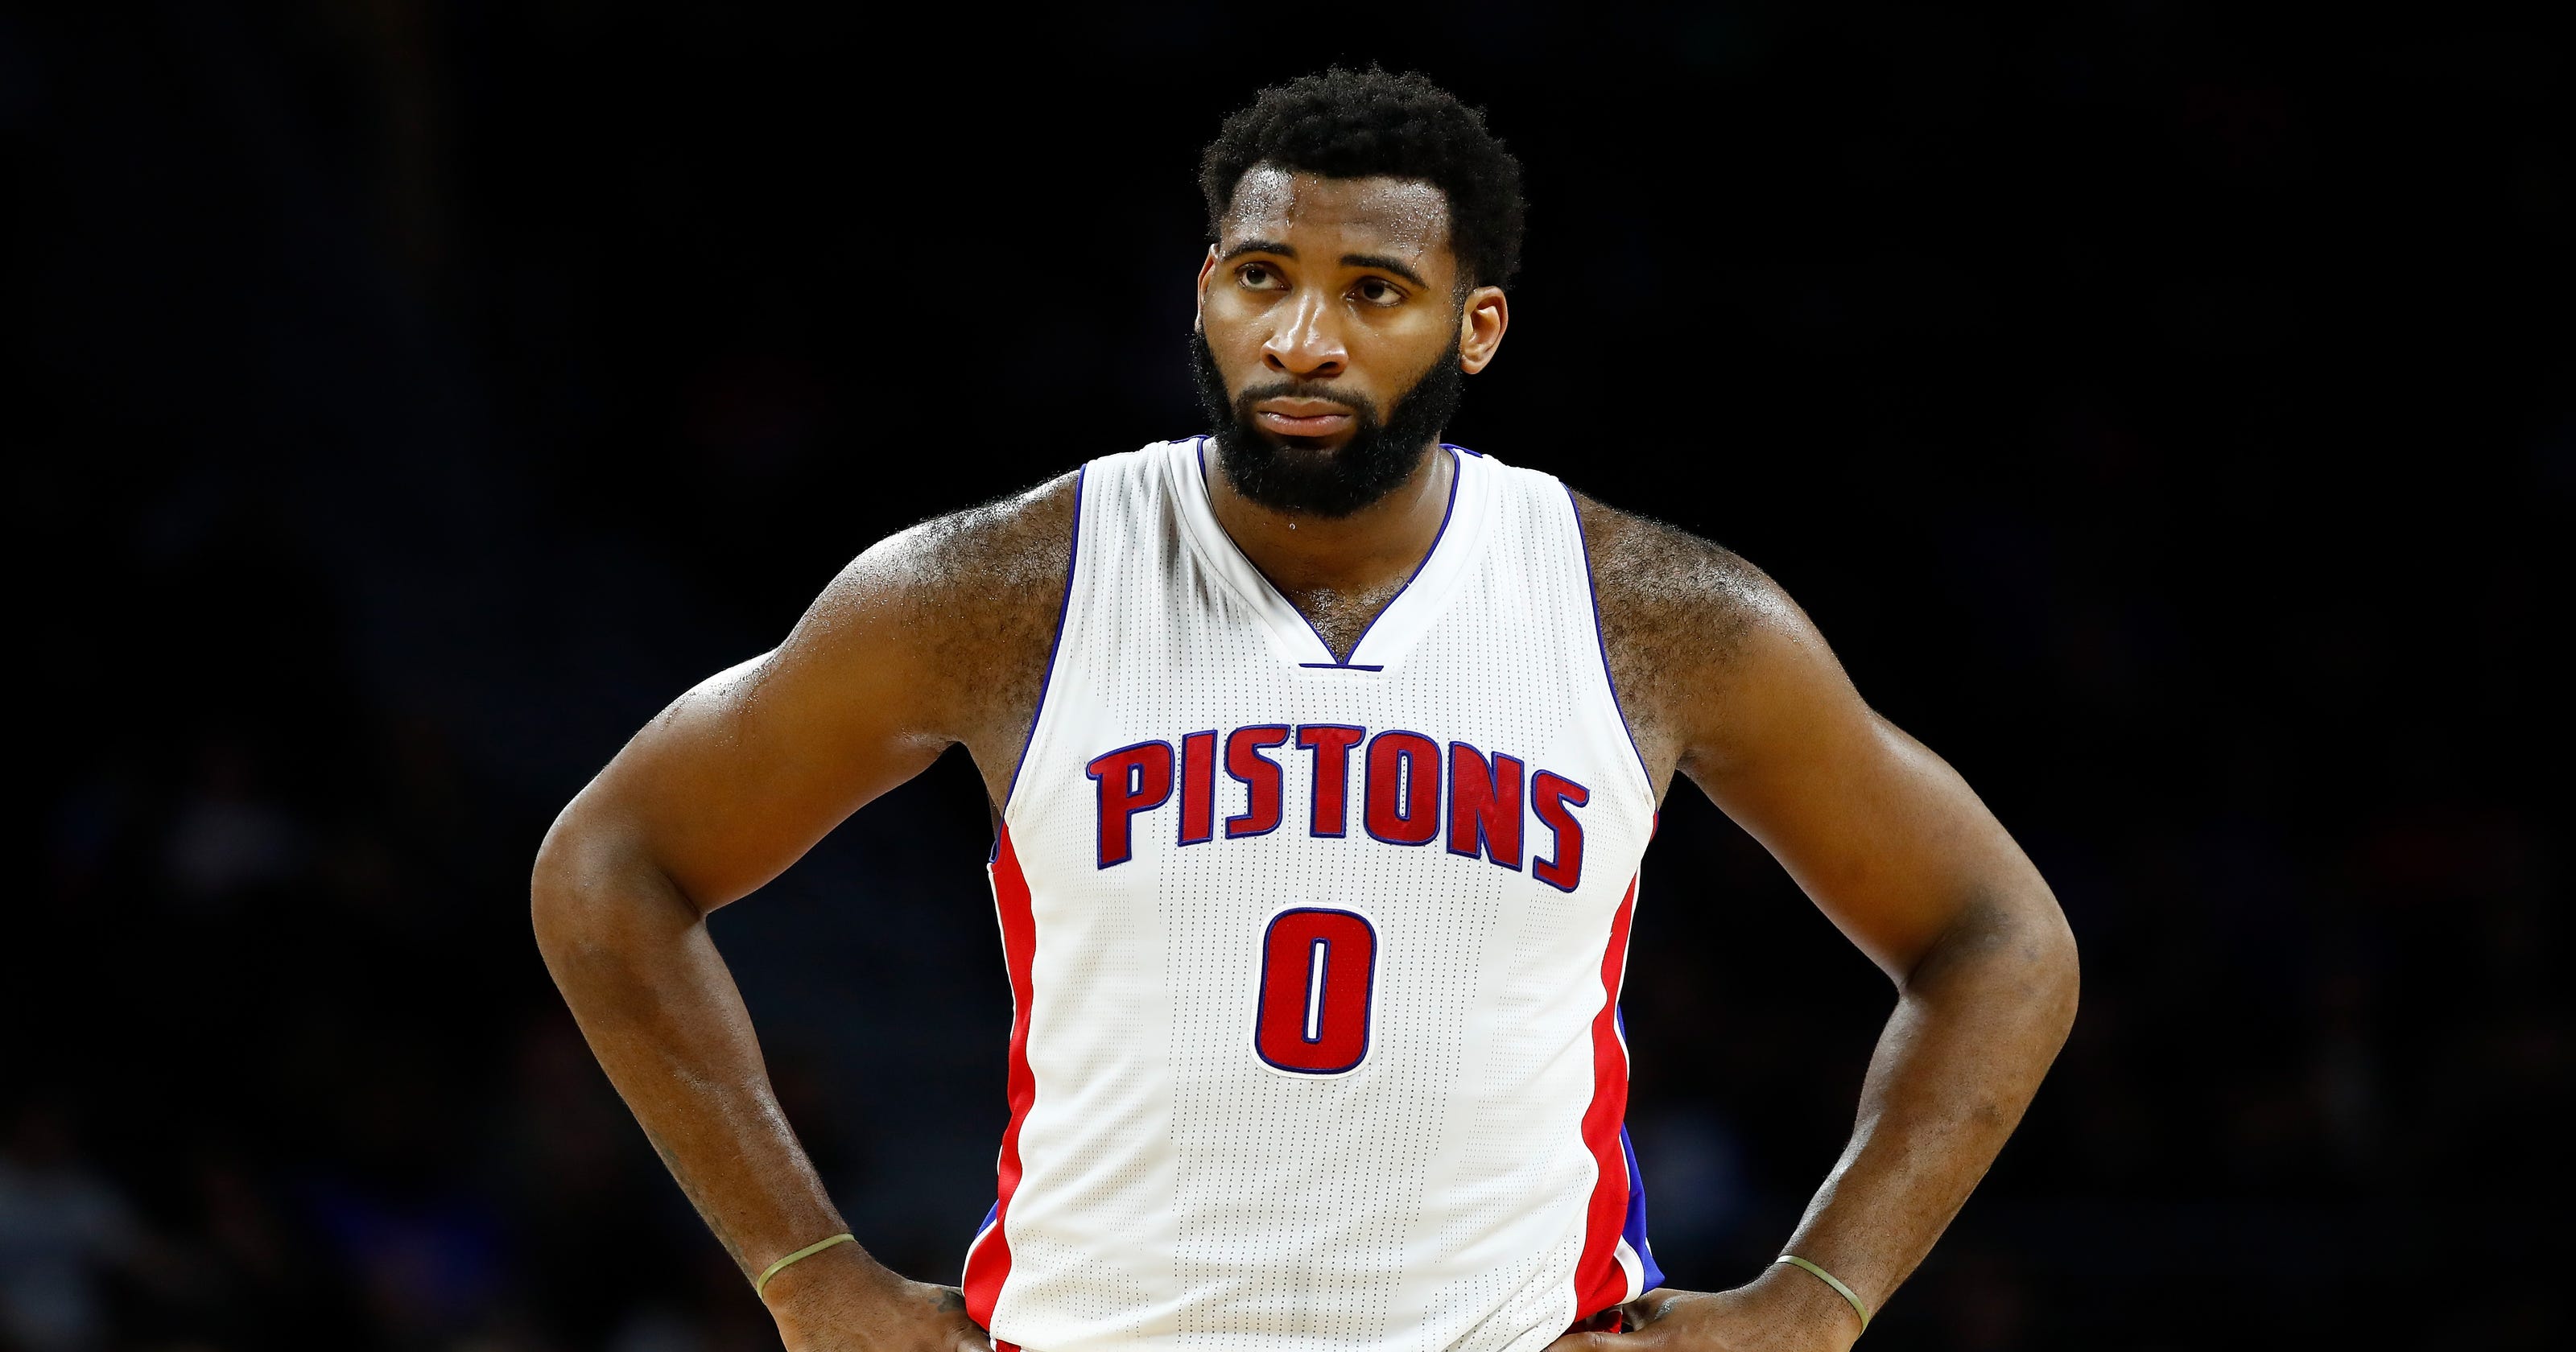 Detroit Pistons' Andre Drummond getting used to NBA trade rumor mill3200 x 1680